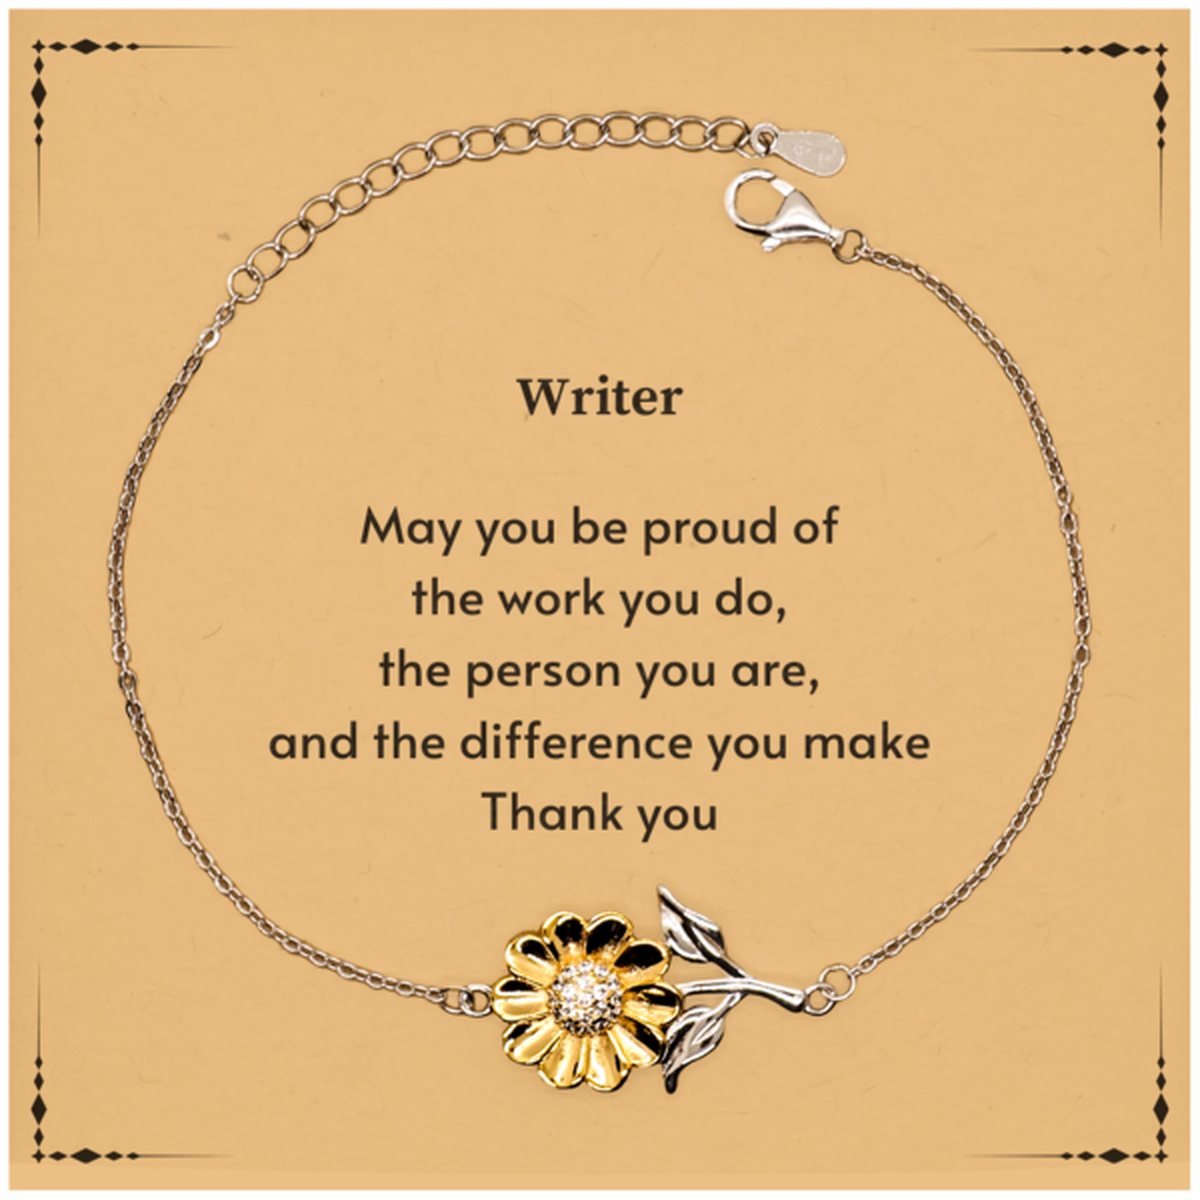 Heartwarming Sunflower Bracelet Retirement Coworkers Gifts for Writer, Writer May You be proud of the work you do, the person you are Gifts for Boss Men Women Friends